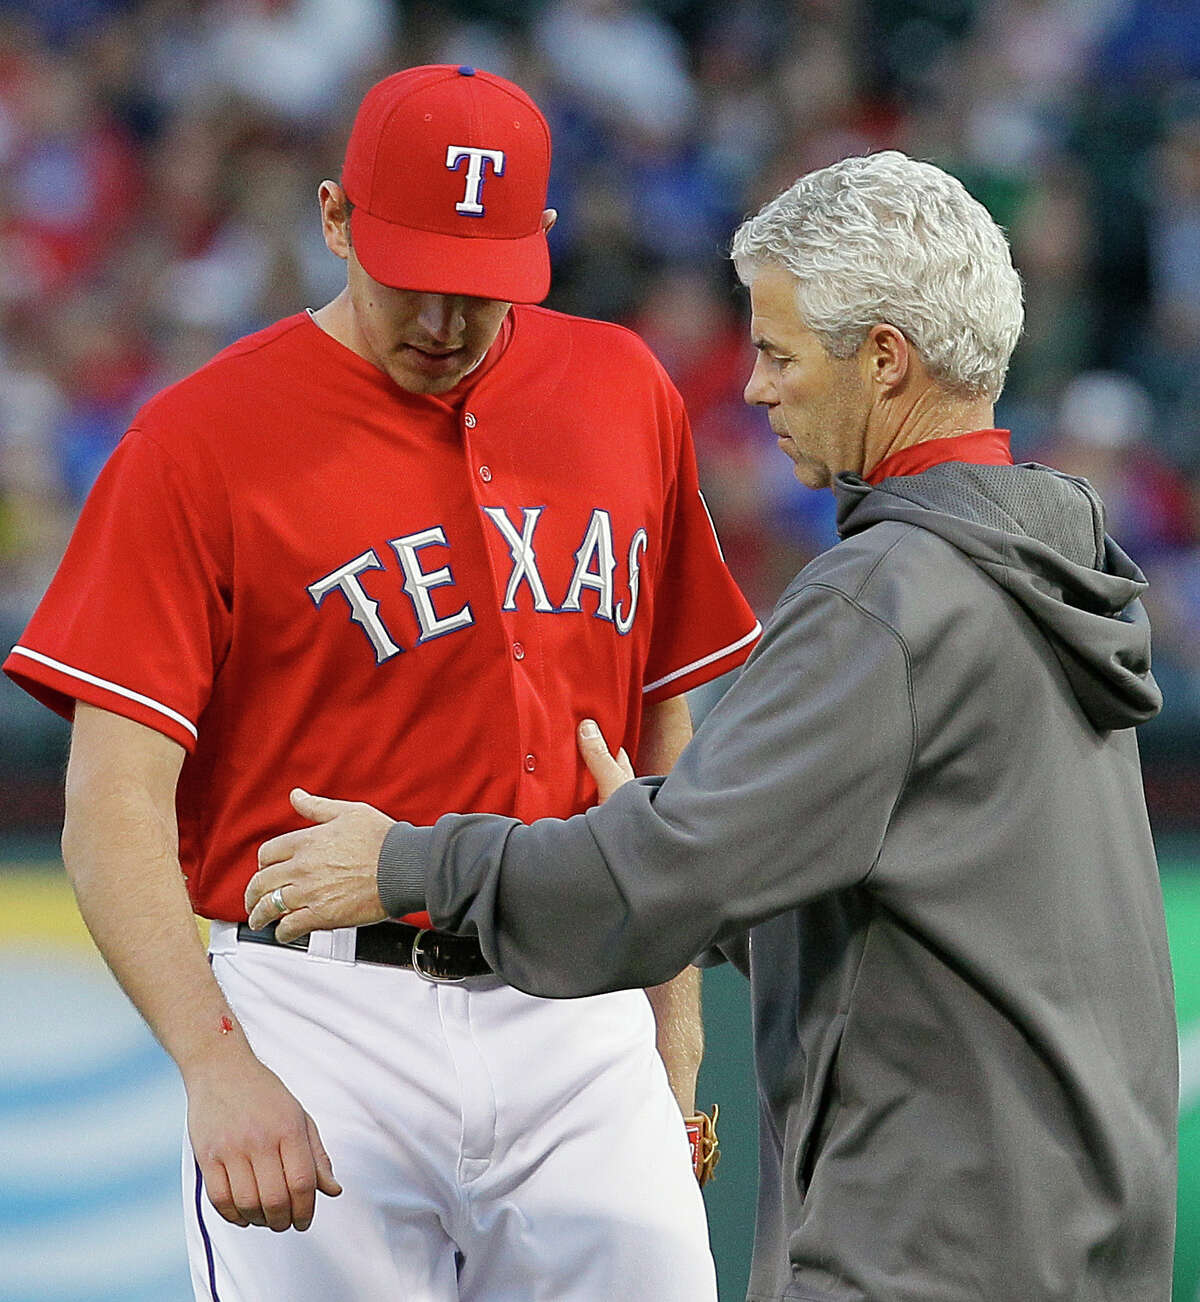 Texas Rangers trainer Jamie Reed, right, checks on starting pitcher Nick Tepesch's right forearm after being hit by a line drive in the second inning of a baseball game against the Seattle Mariners at Rangers Ballpark in Arlington, Saturday, April 20, 2013, in Arlington, Texas. Tepesch left the game. (AP Photo/Brandon Wade)